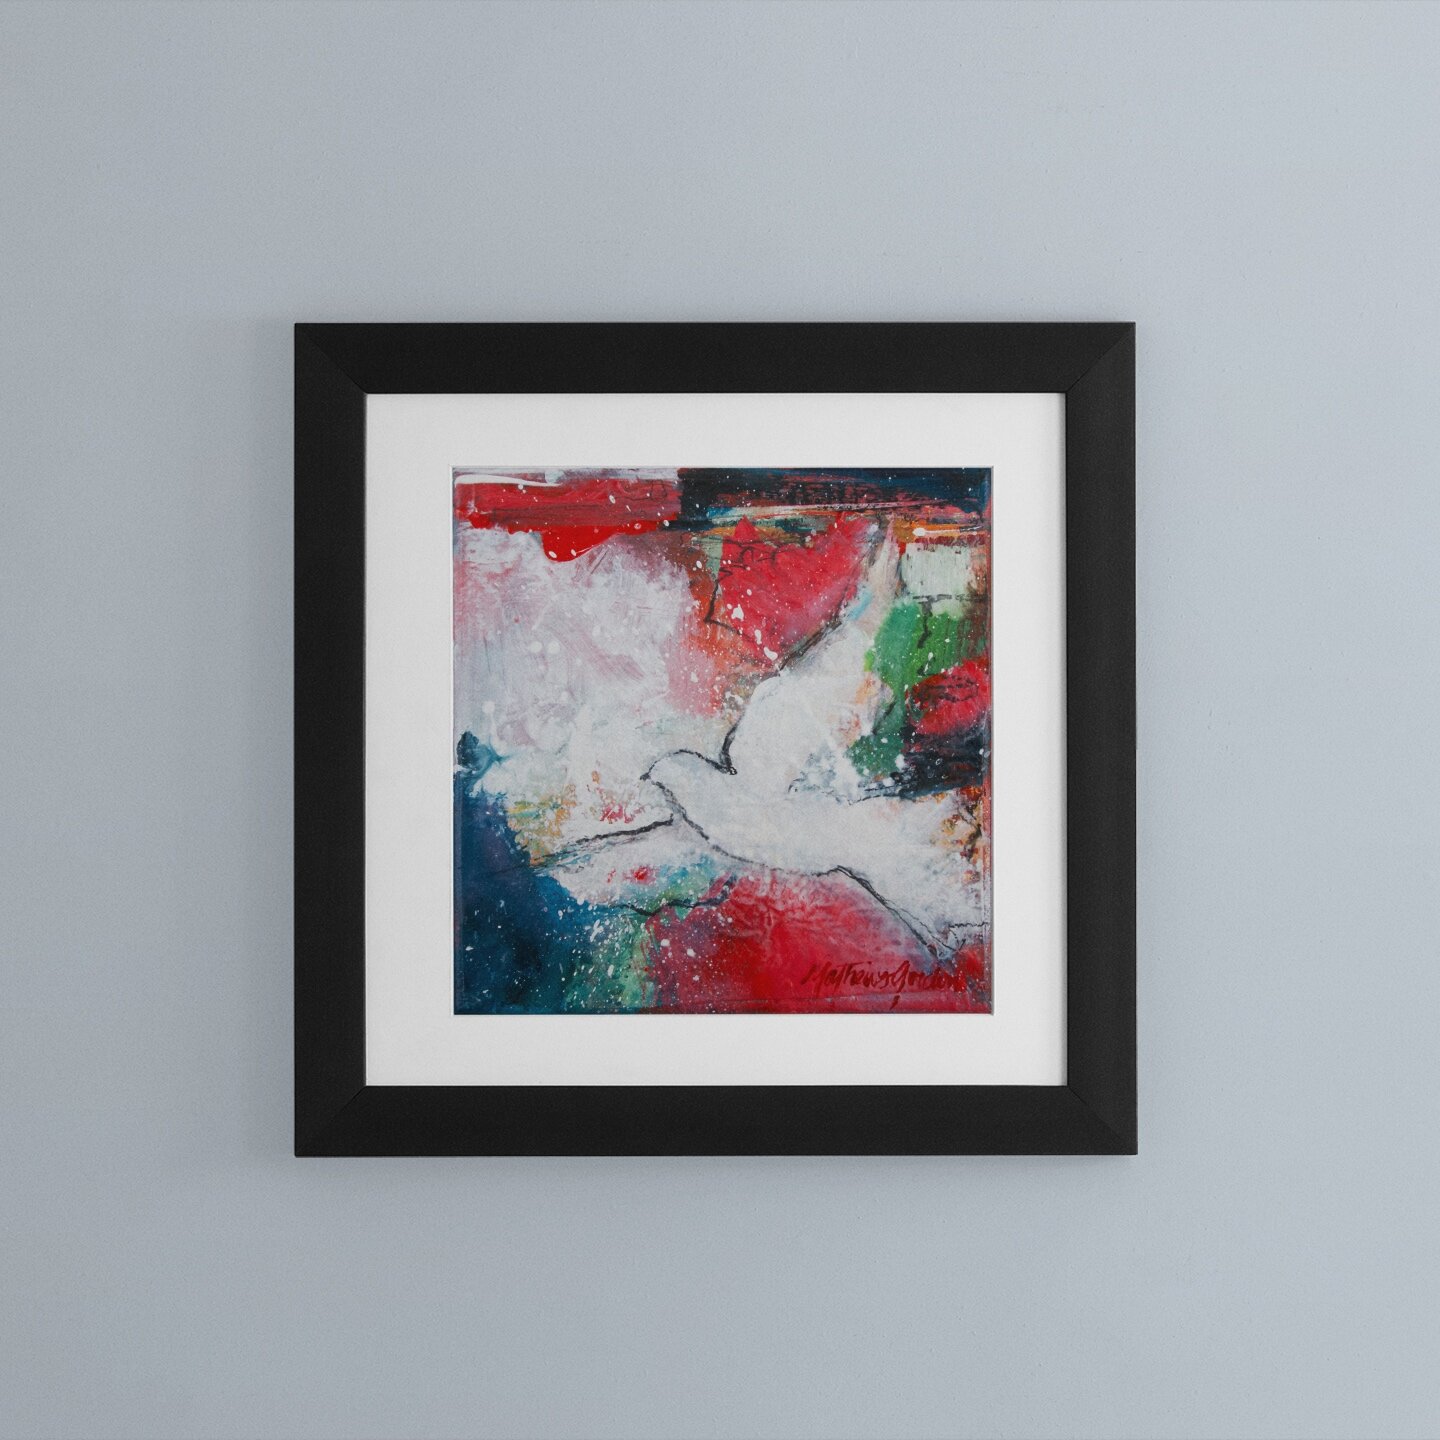 square-framed-art-print-on-a-pastel-color-wall-a15282.jpg